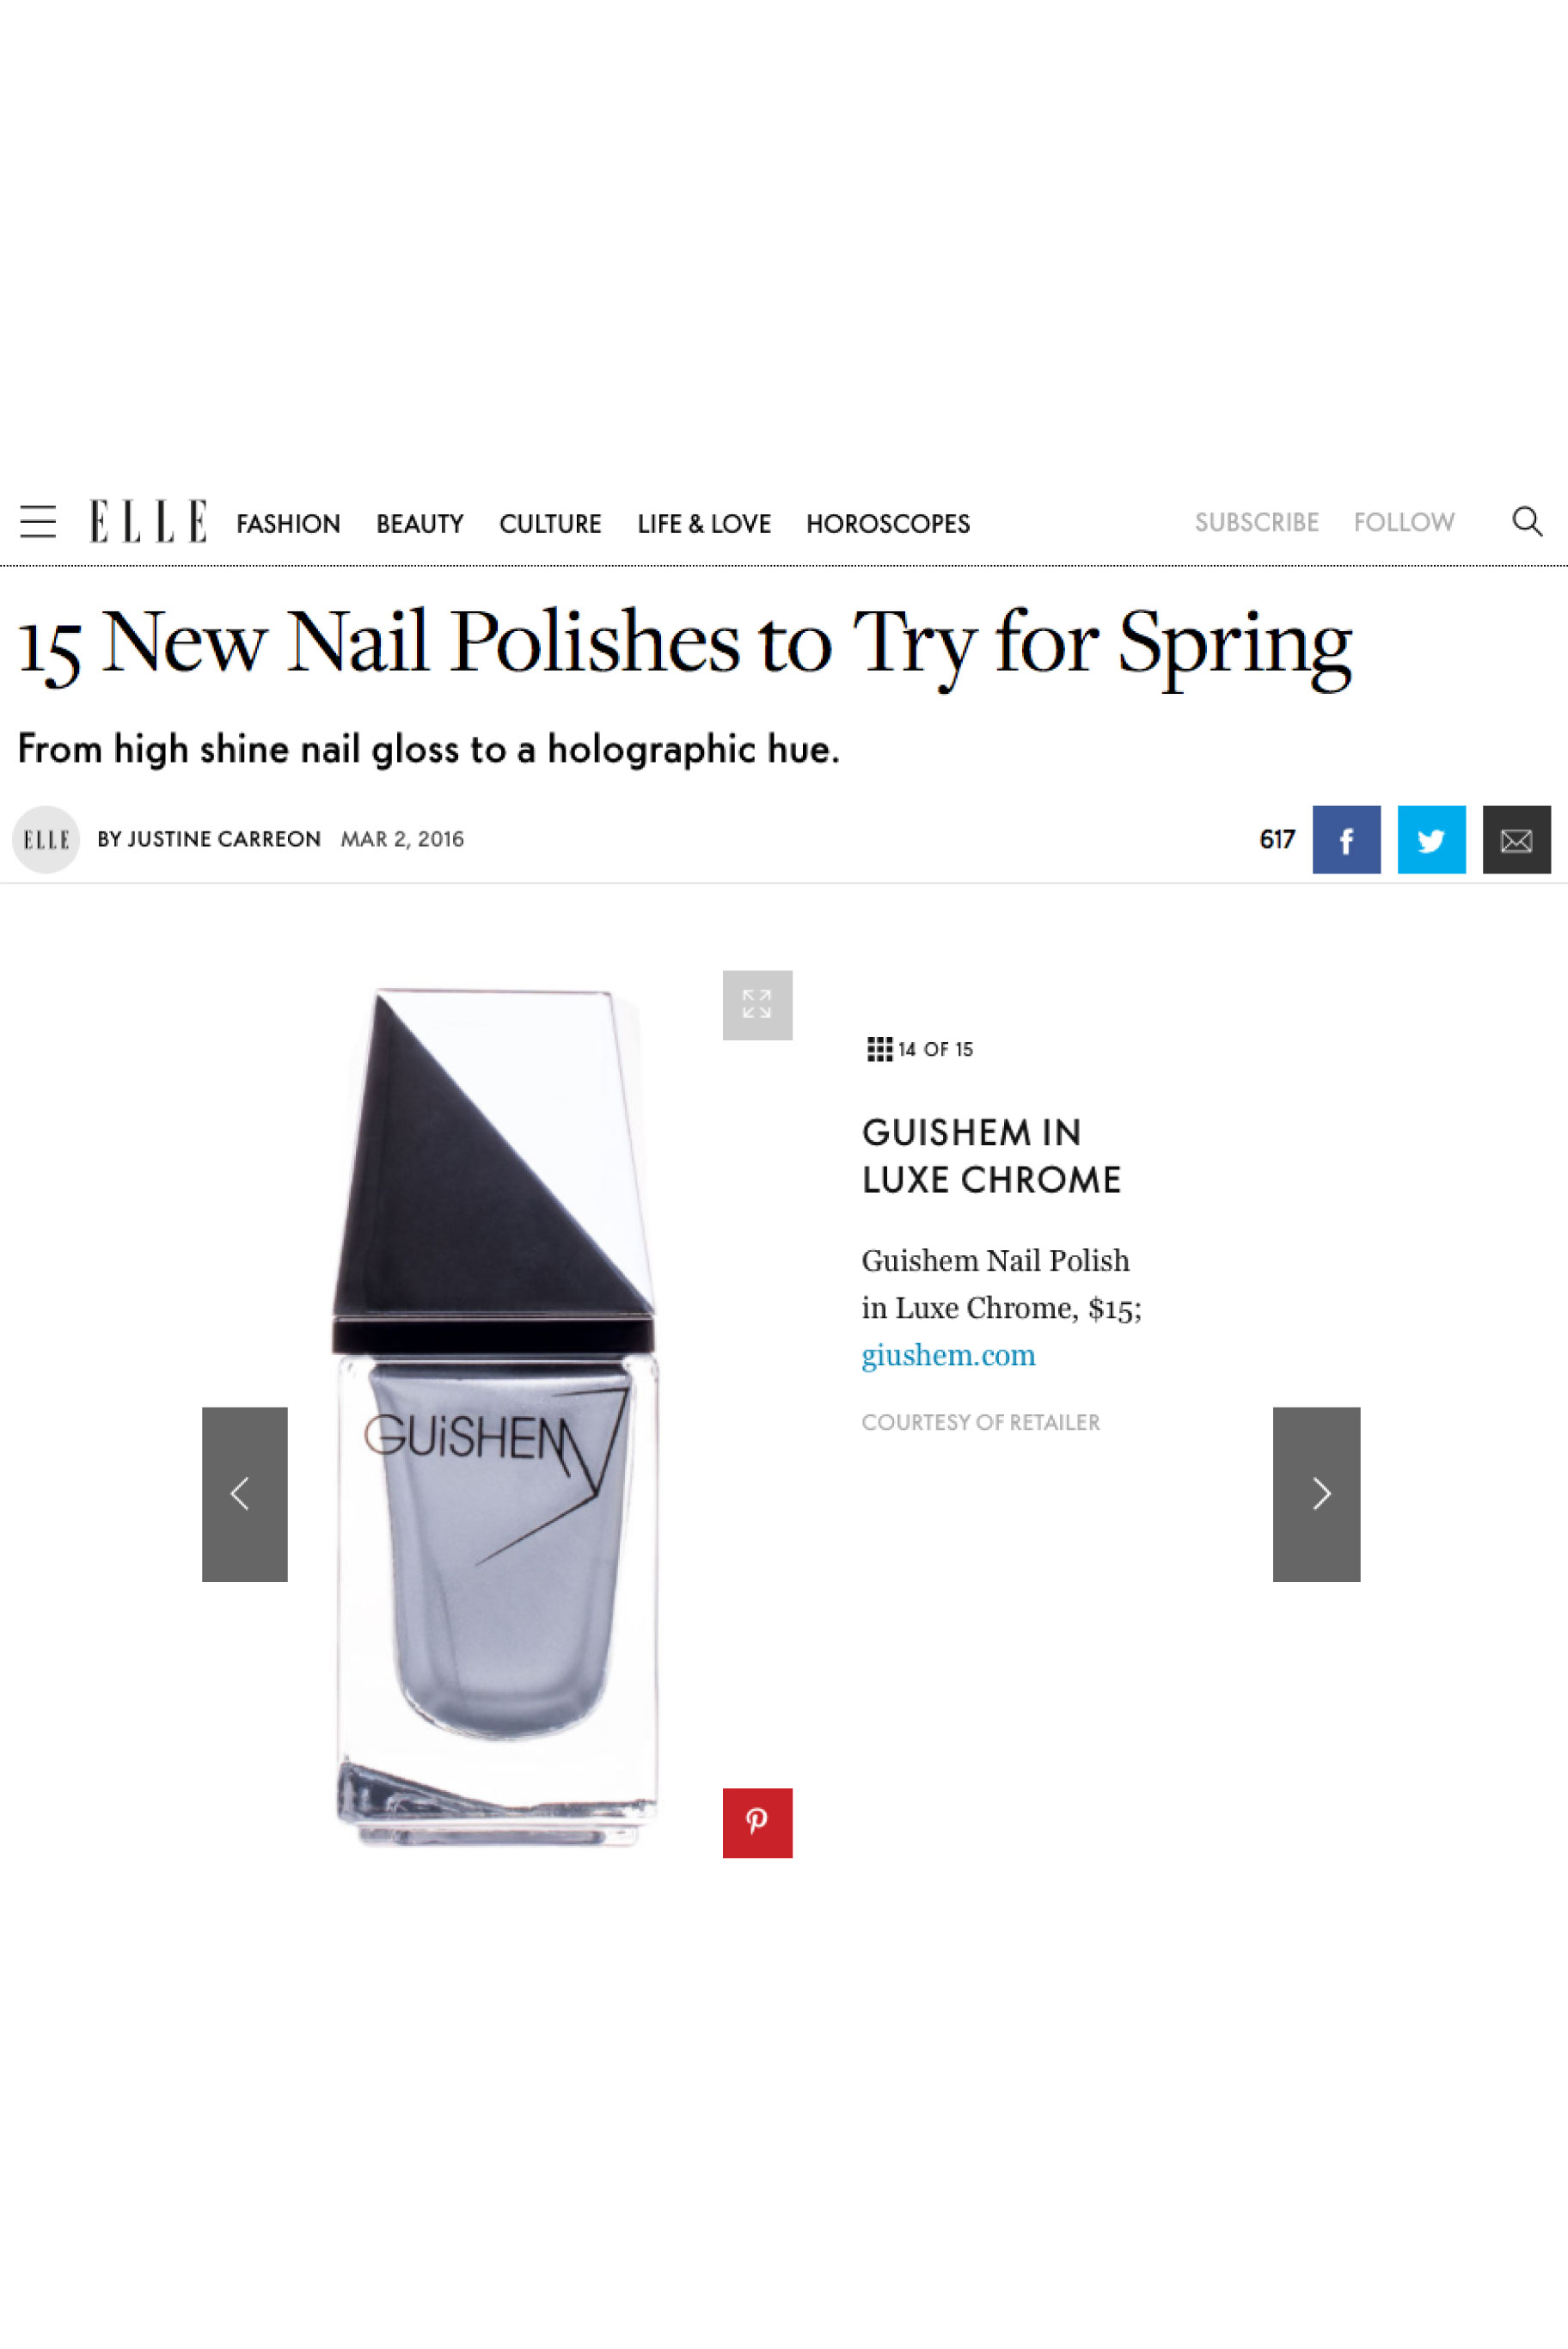 GUiSHEM featured in Elle: 15 New Nail Polishes to Try for Spring by Justine Carreon